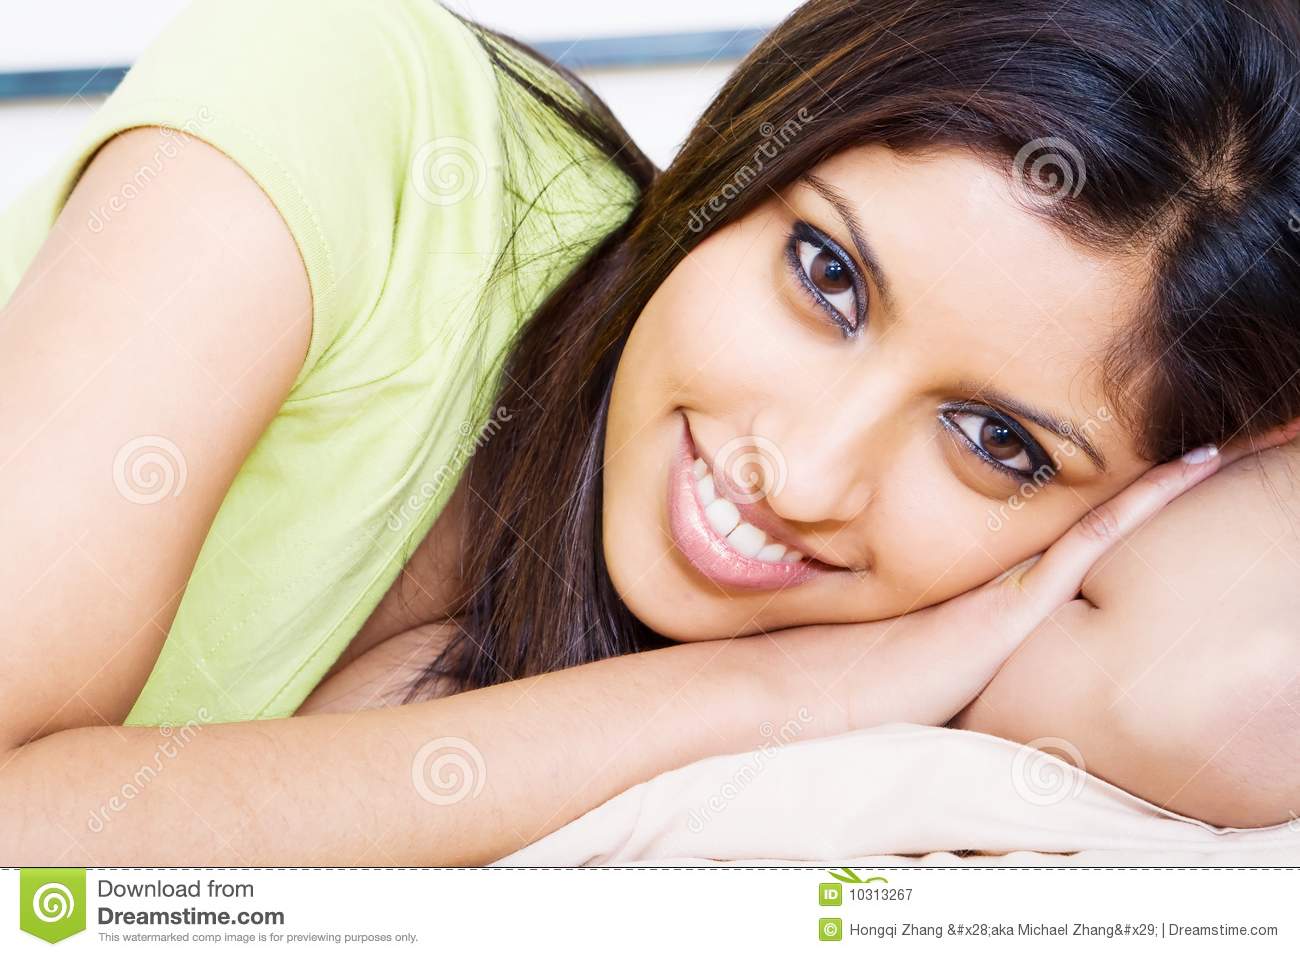 Middle Eastern Woman Royalty Free Stock Photography   Image  10313267